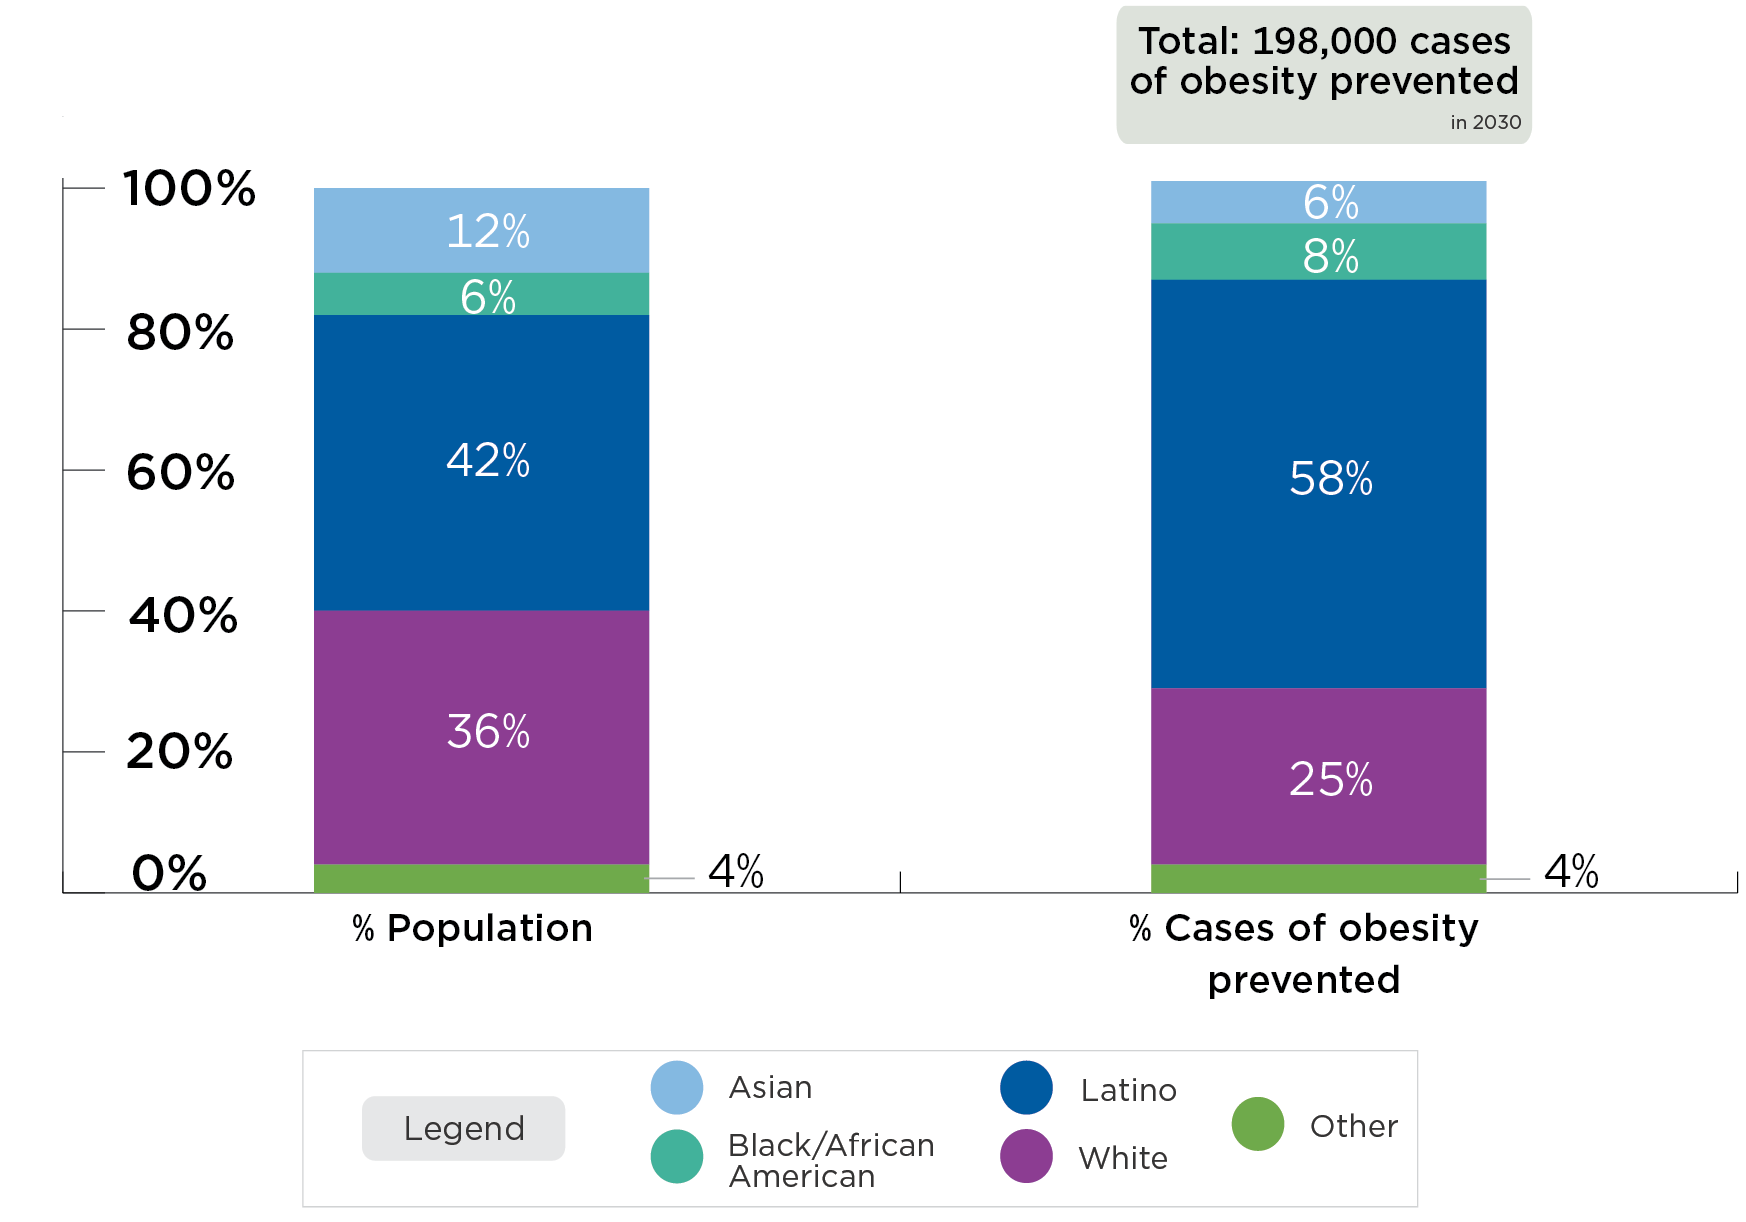 A tax in California could prevent 198,000 cases of obesity in 2030. 58% of prevented obesity cases will be among Latino Californians, while they represent 42% of the population. 8% of prevented obesity cases will be among Black/African American Californians, while they represent 6% of the population.